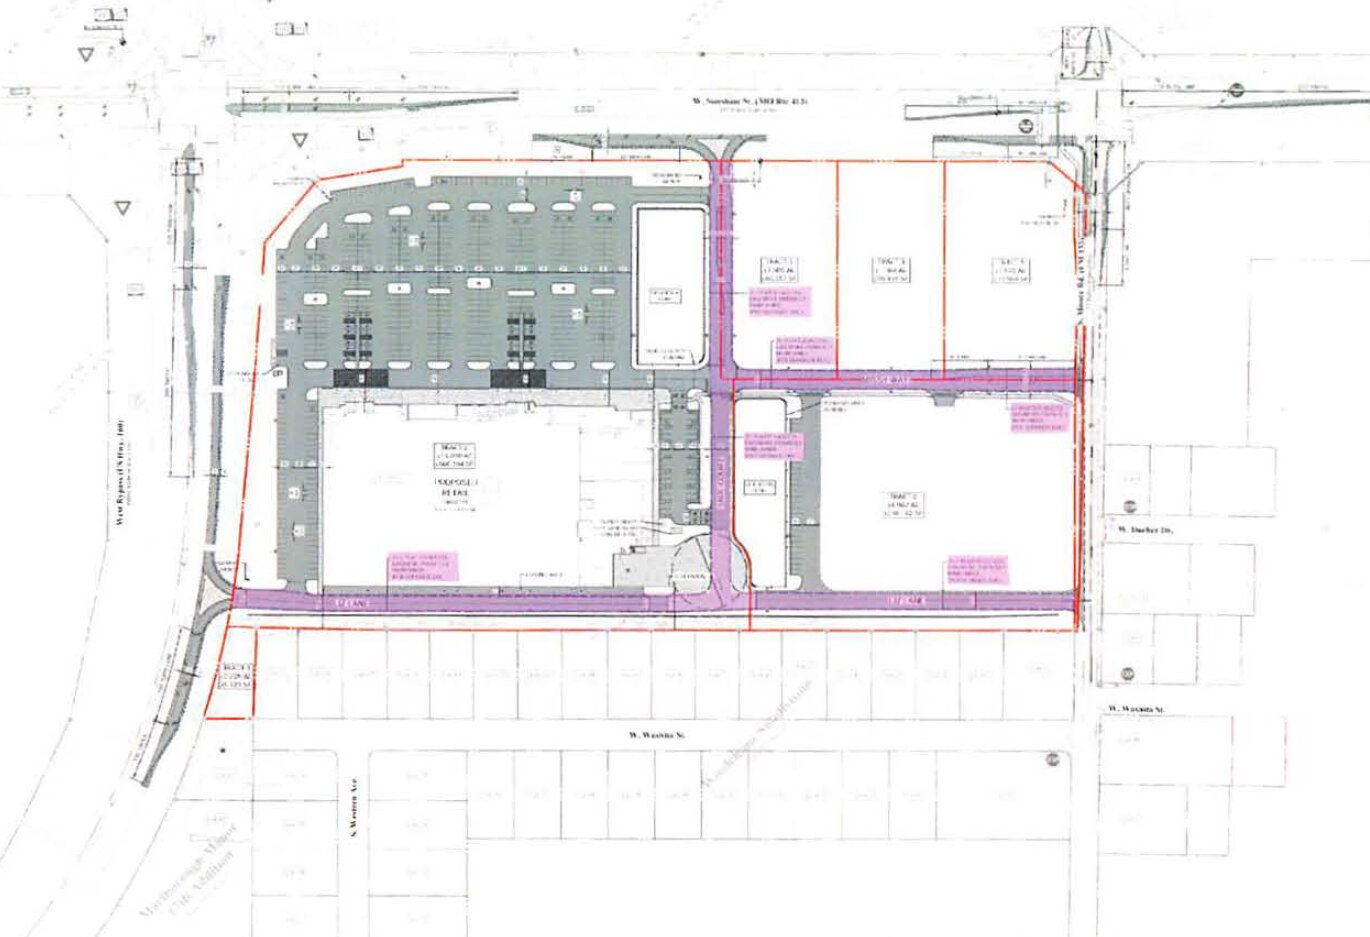 On this plan for Sunshine Towne Center, interior access roads are shaded in purple. The proposed community improvement district is the area to the east of the purple road in the center of the image, and the proposed Target store is to the west of that purple line.  